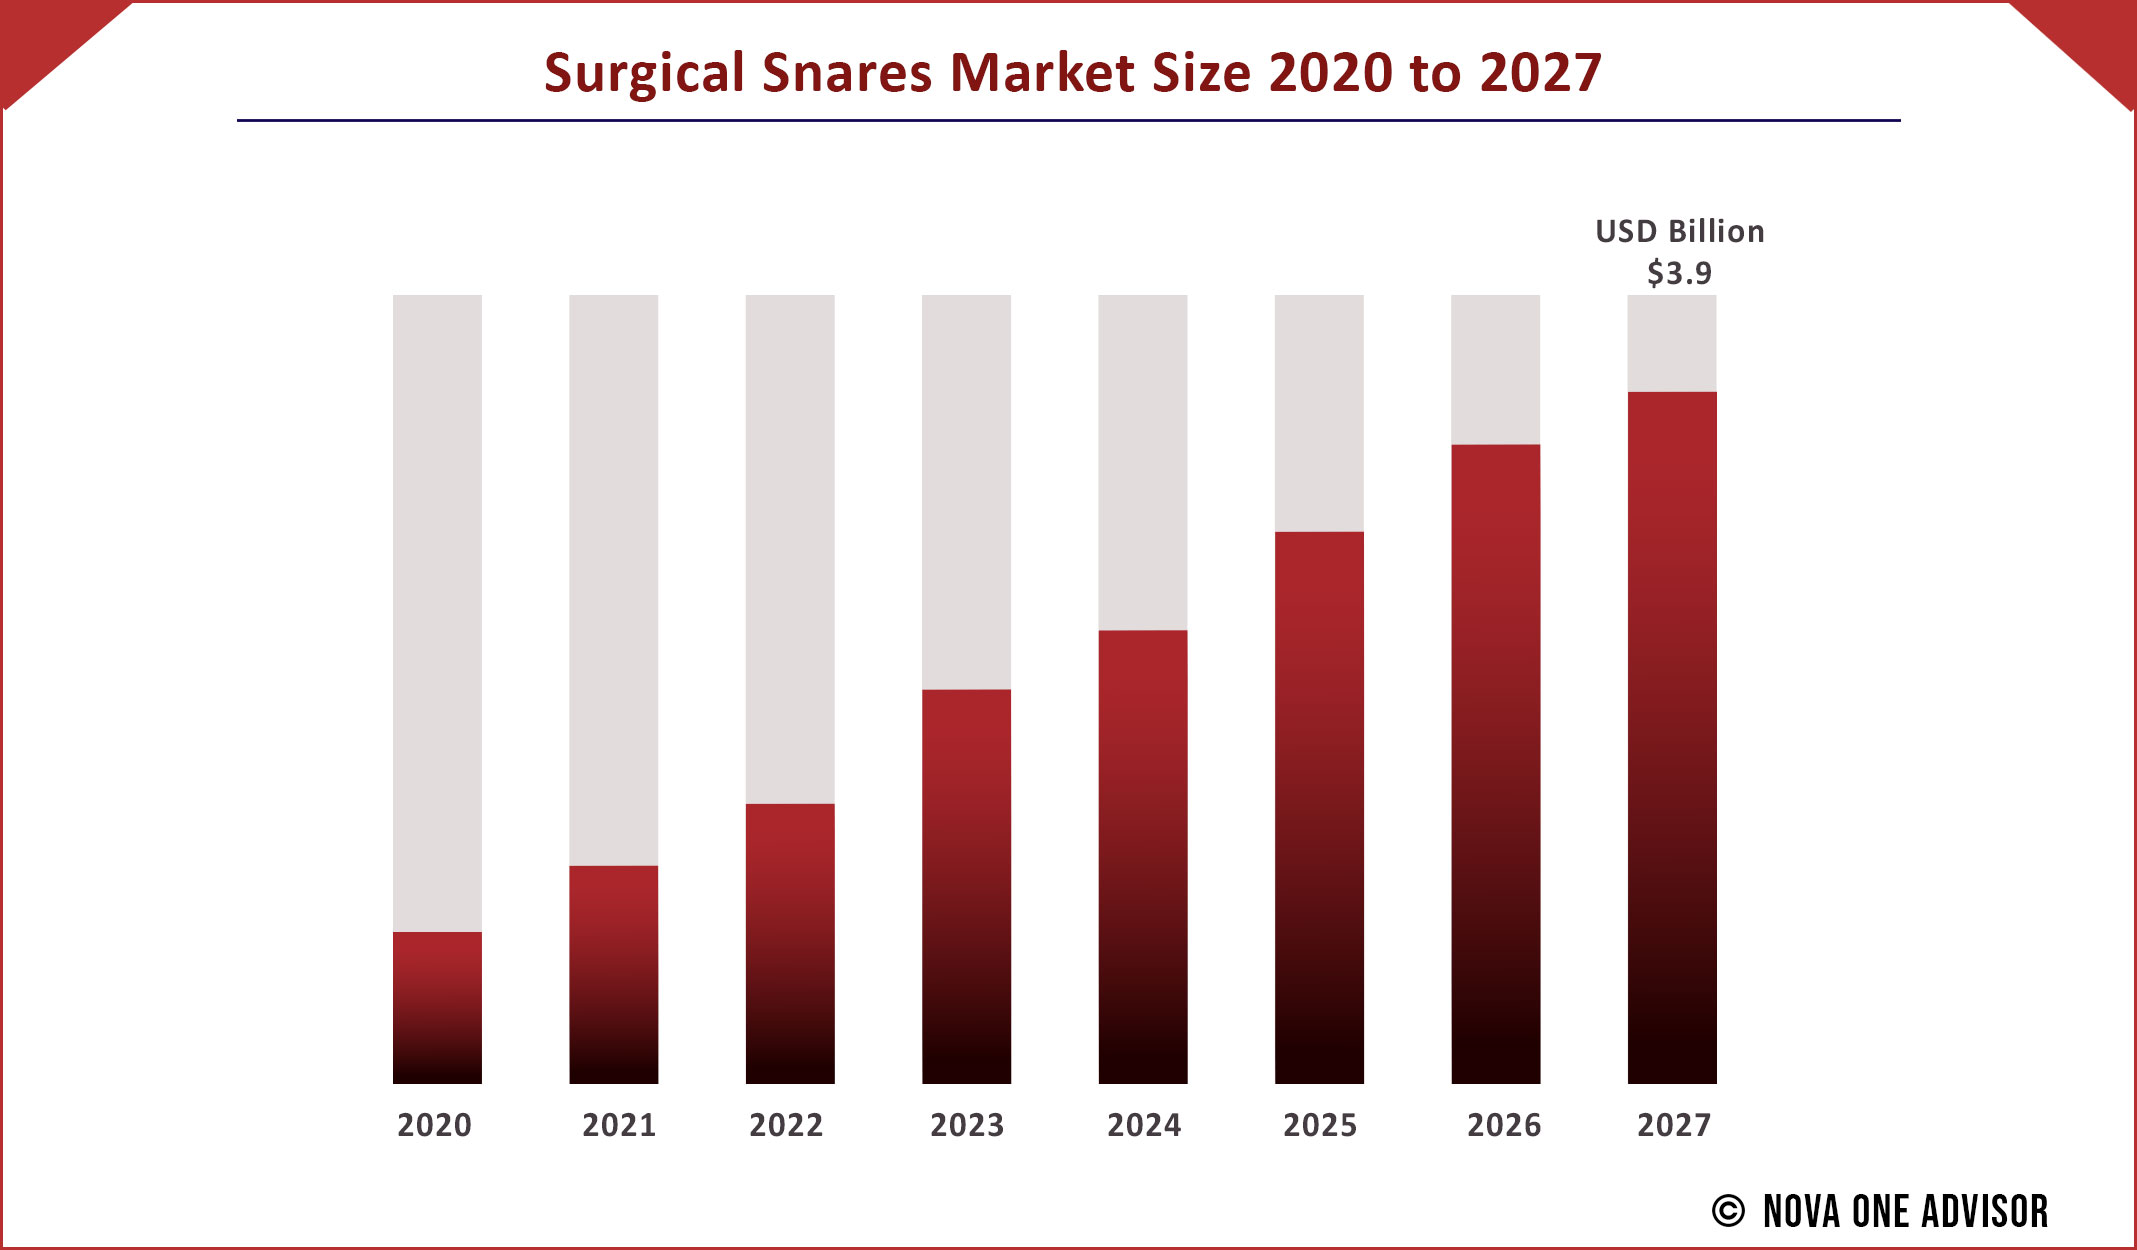 Surgical Snares Market Size 2020 to 2027